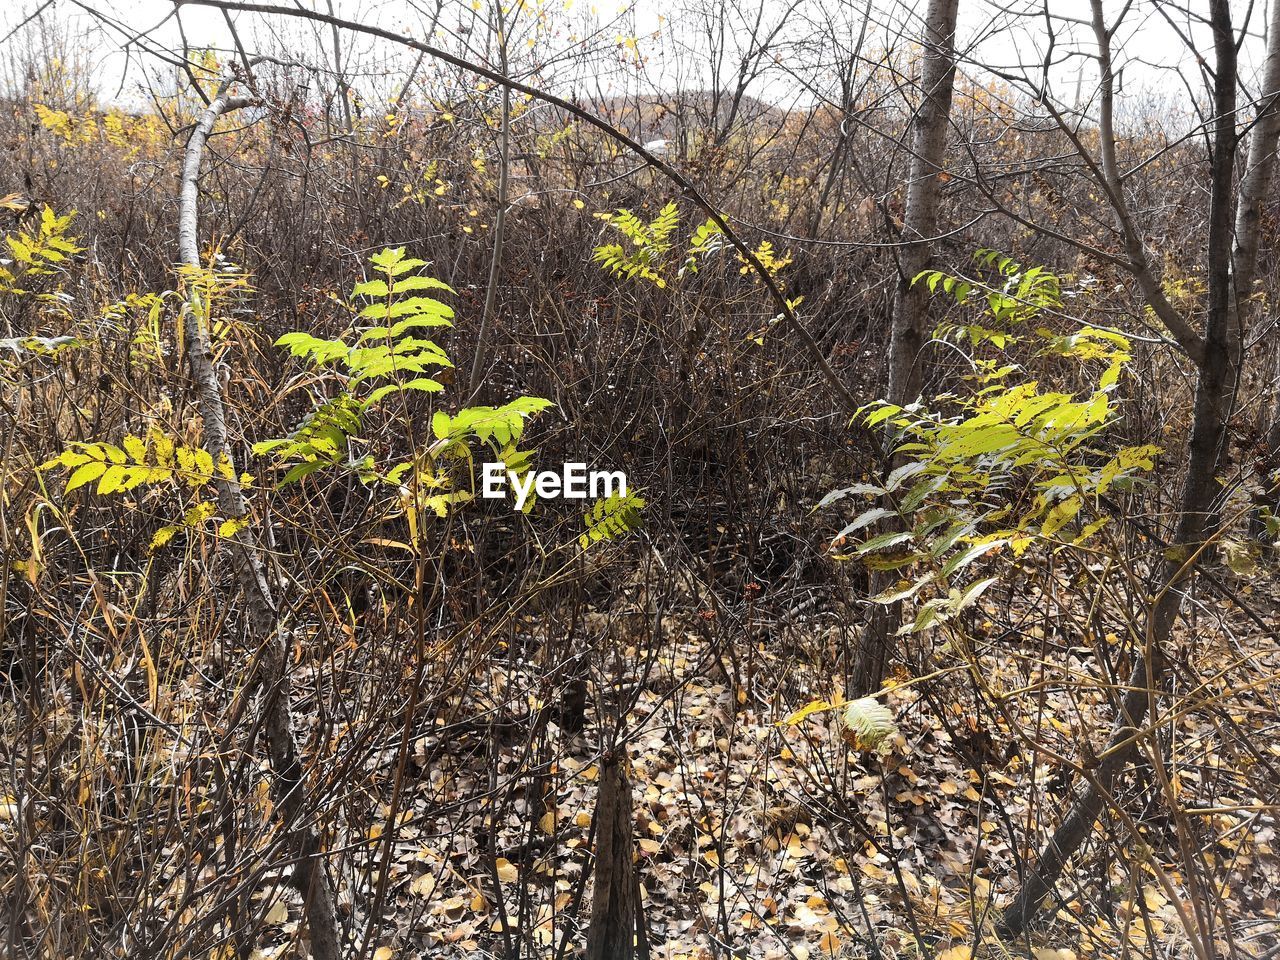 VIEW OF PLANT GROWING IN FOREST